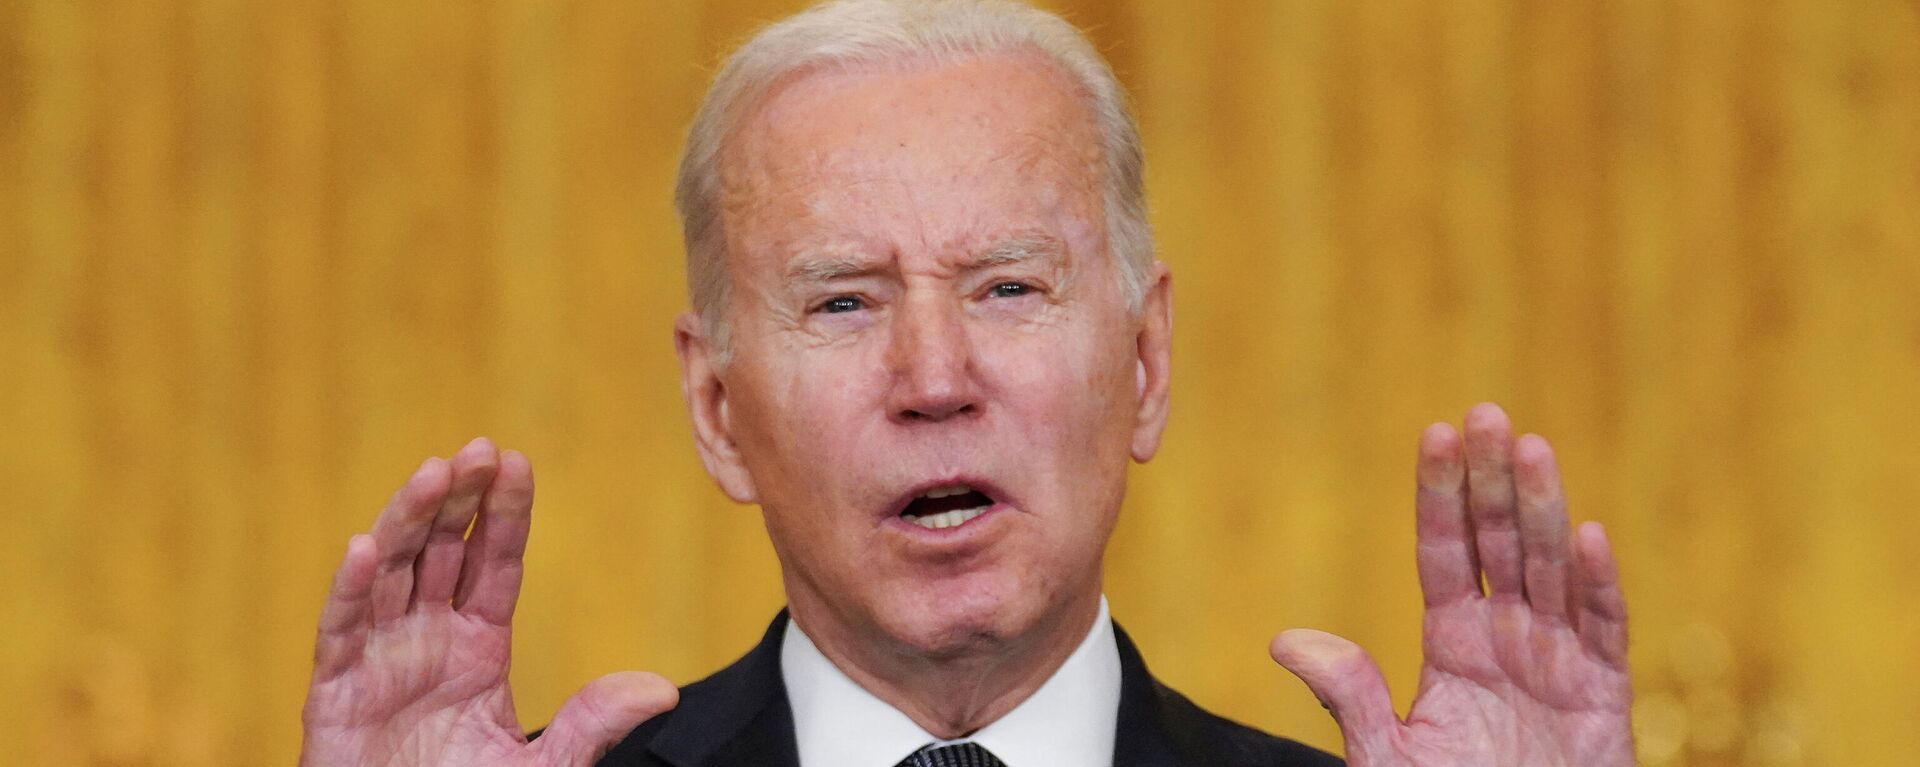 U.S. President Joe Biden gestures as he speaks about the situation in Russia and Ukraine from the White House in Washington, U.S., February 15, 2022. - Sputnik International, 1920, 21.02.2022